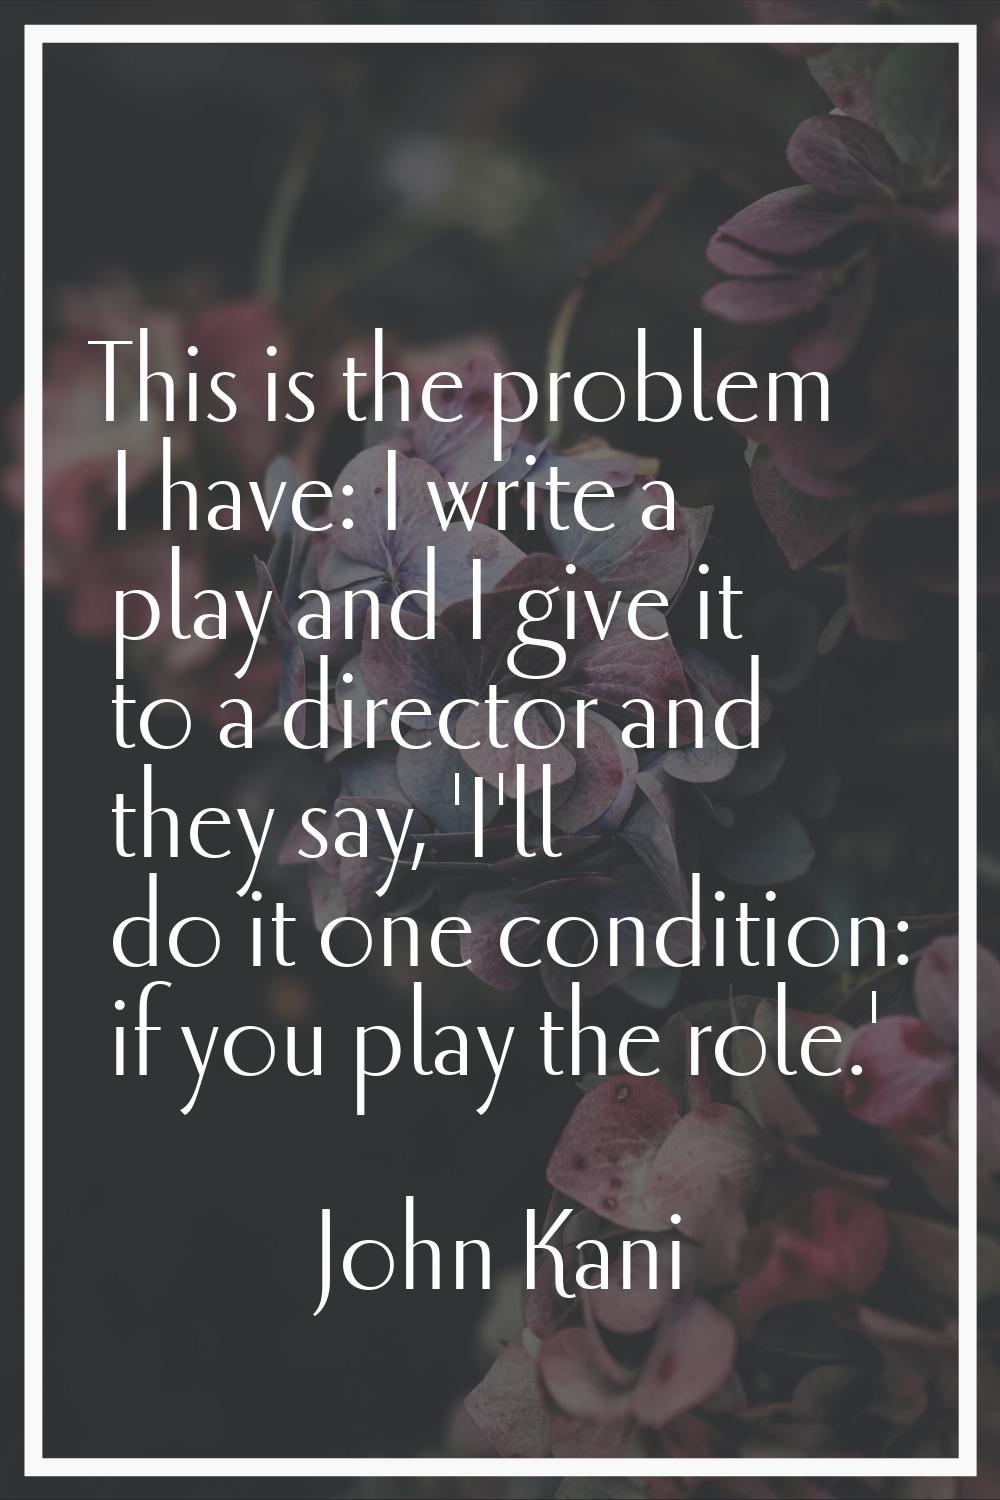 This is the problem I have: I write a play and I give it to a director and they say, 'I'll do it on